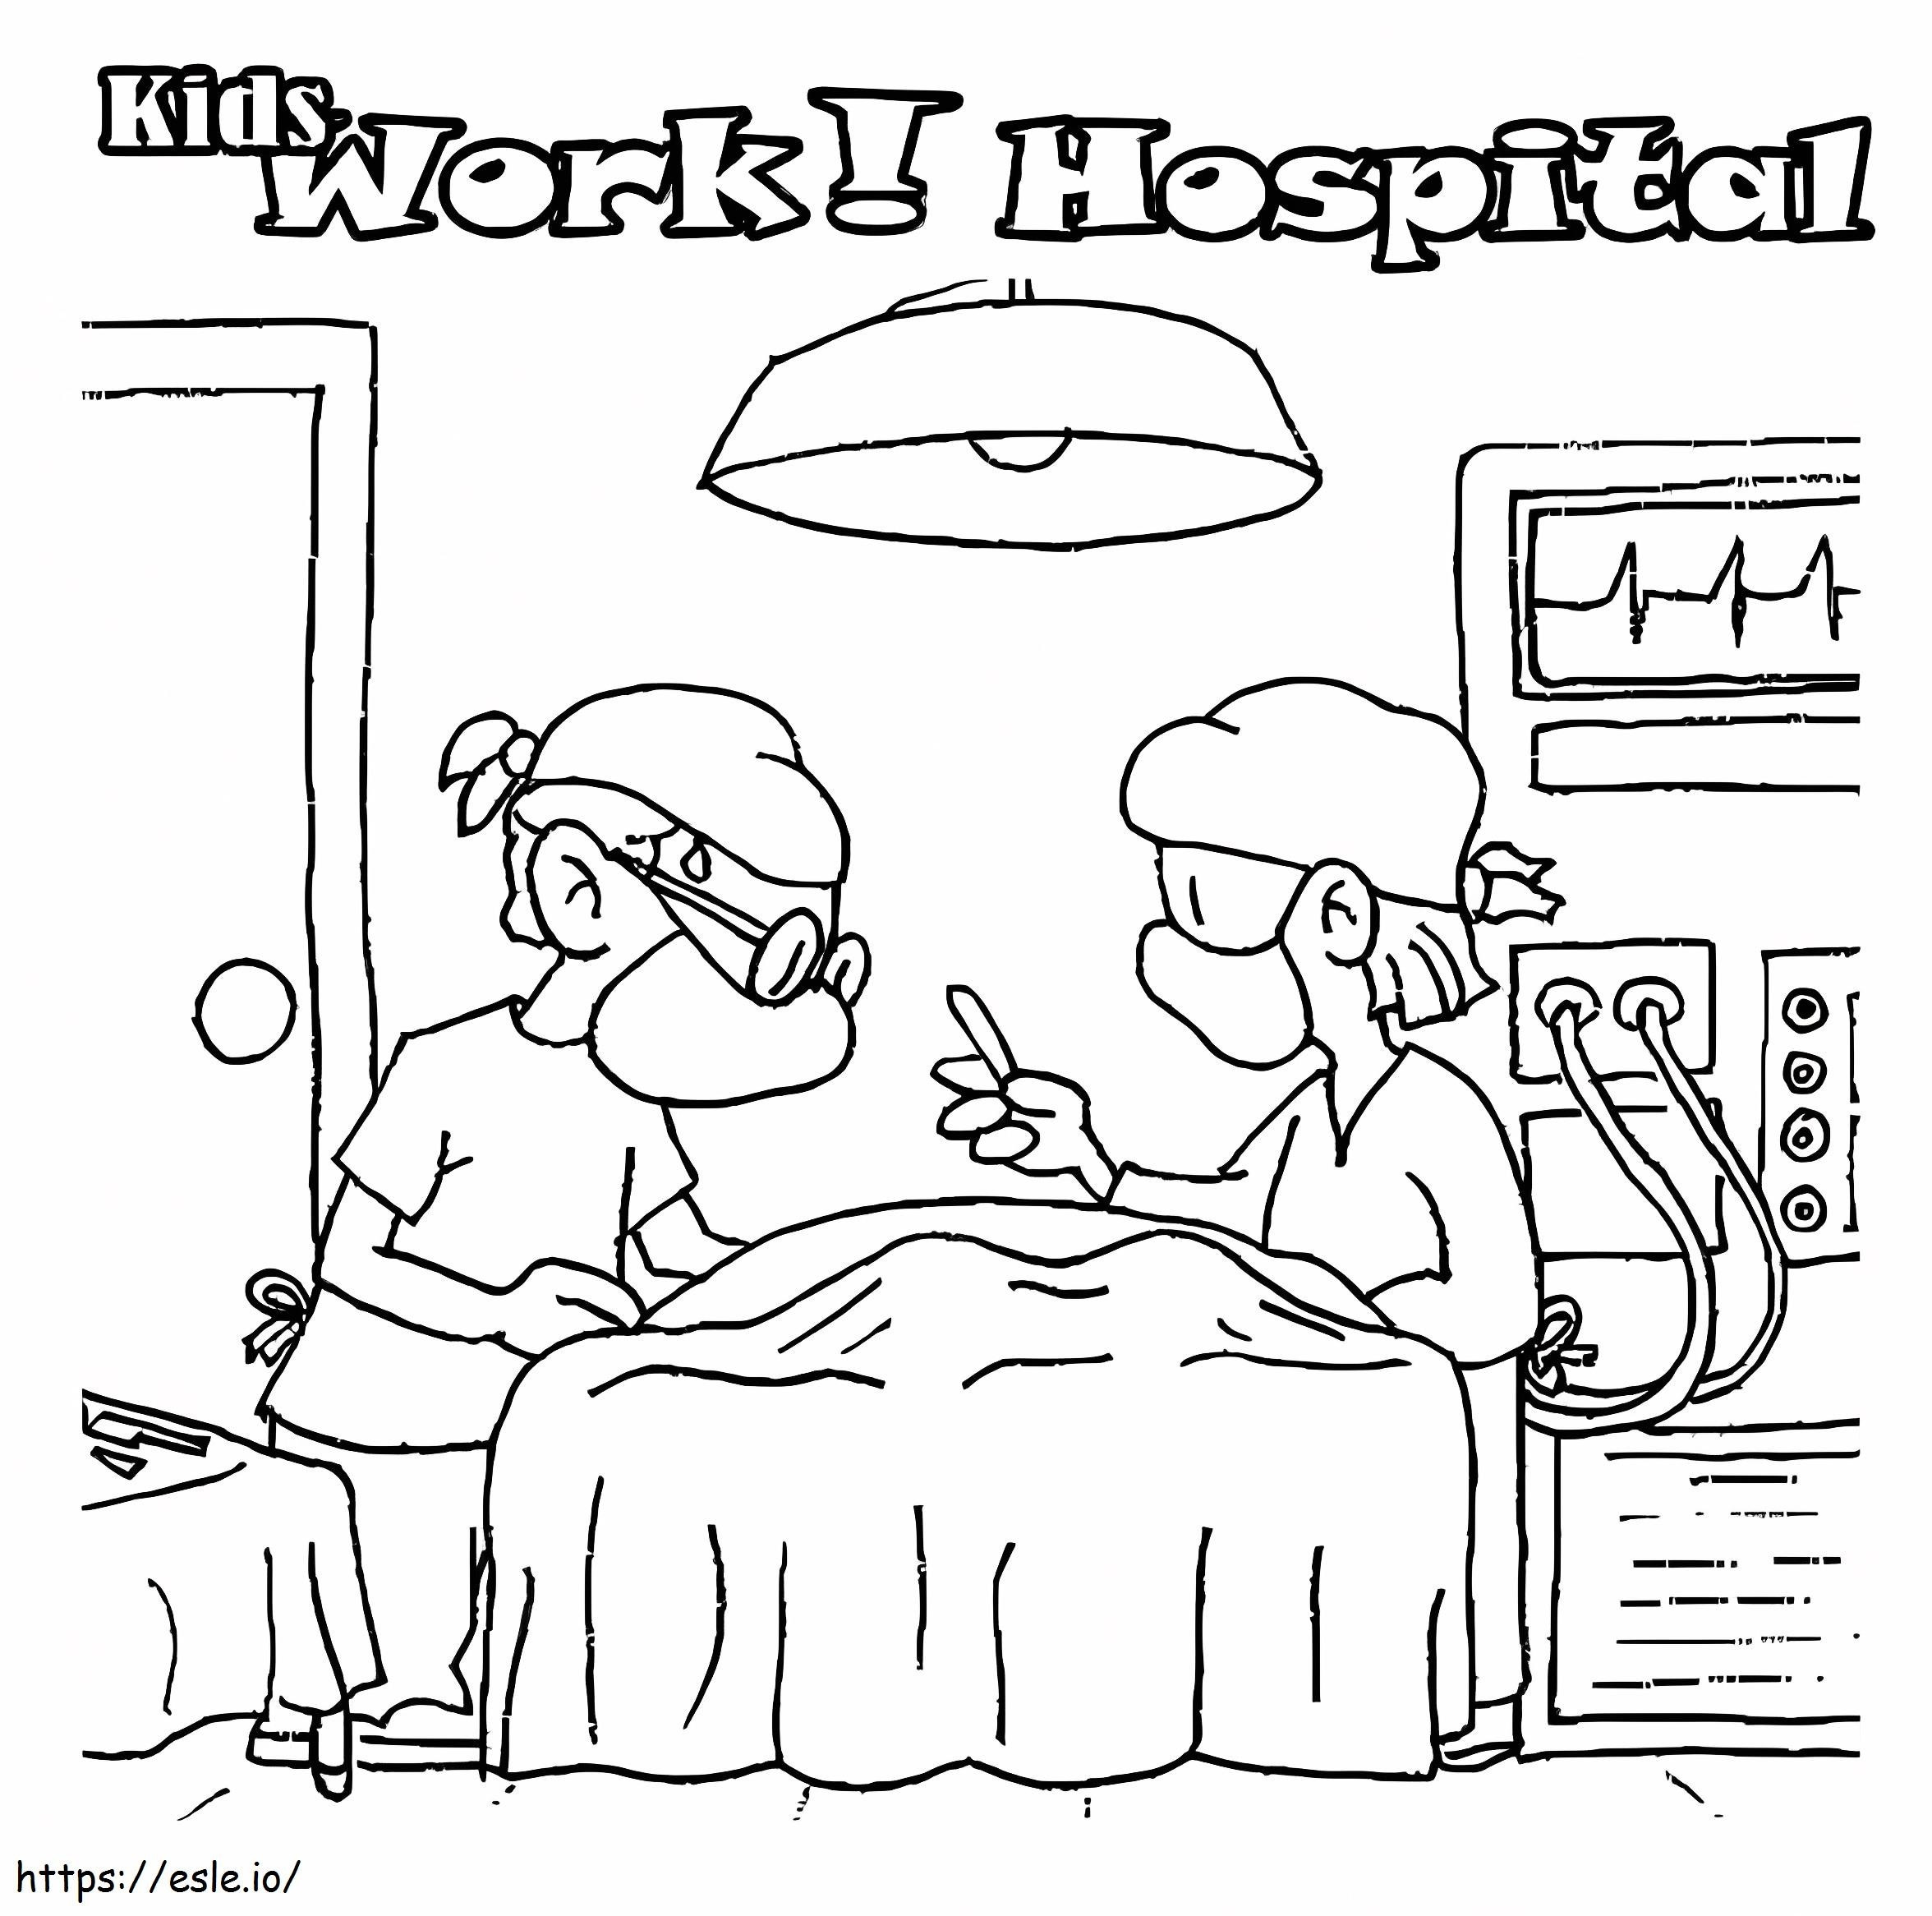 Doctors Hospital coloring page